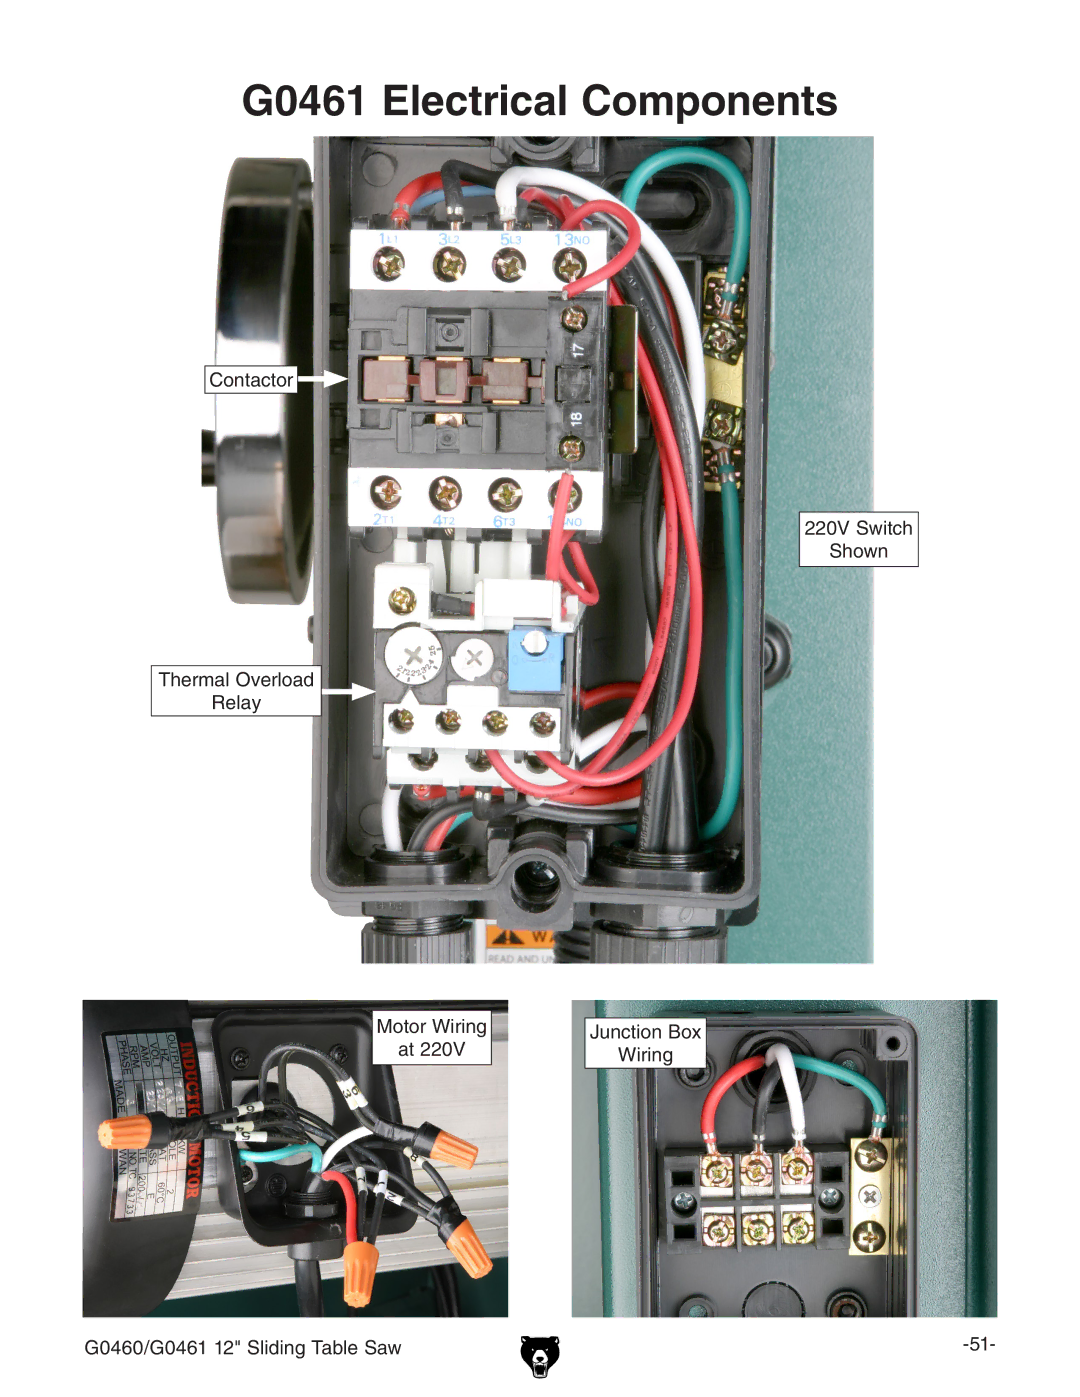 Grizzly G0460 owner manual G0461 Electrical Components 